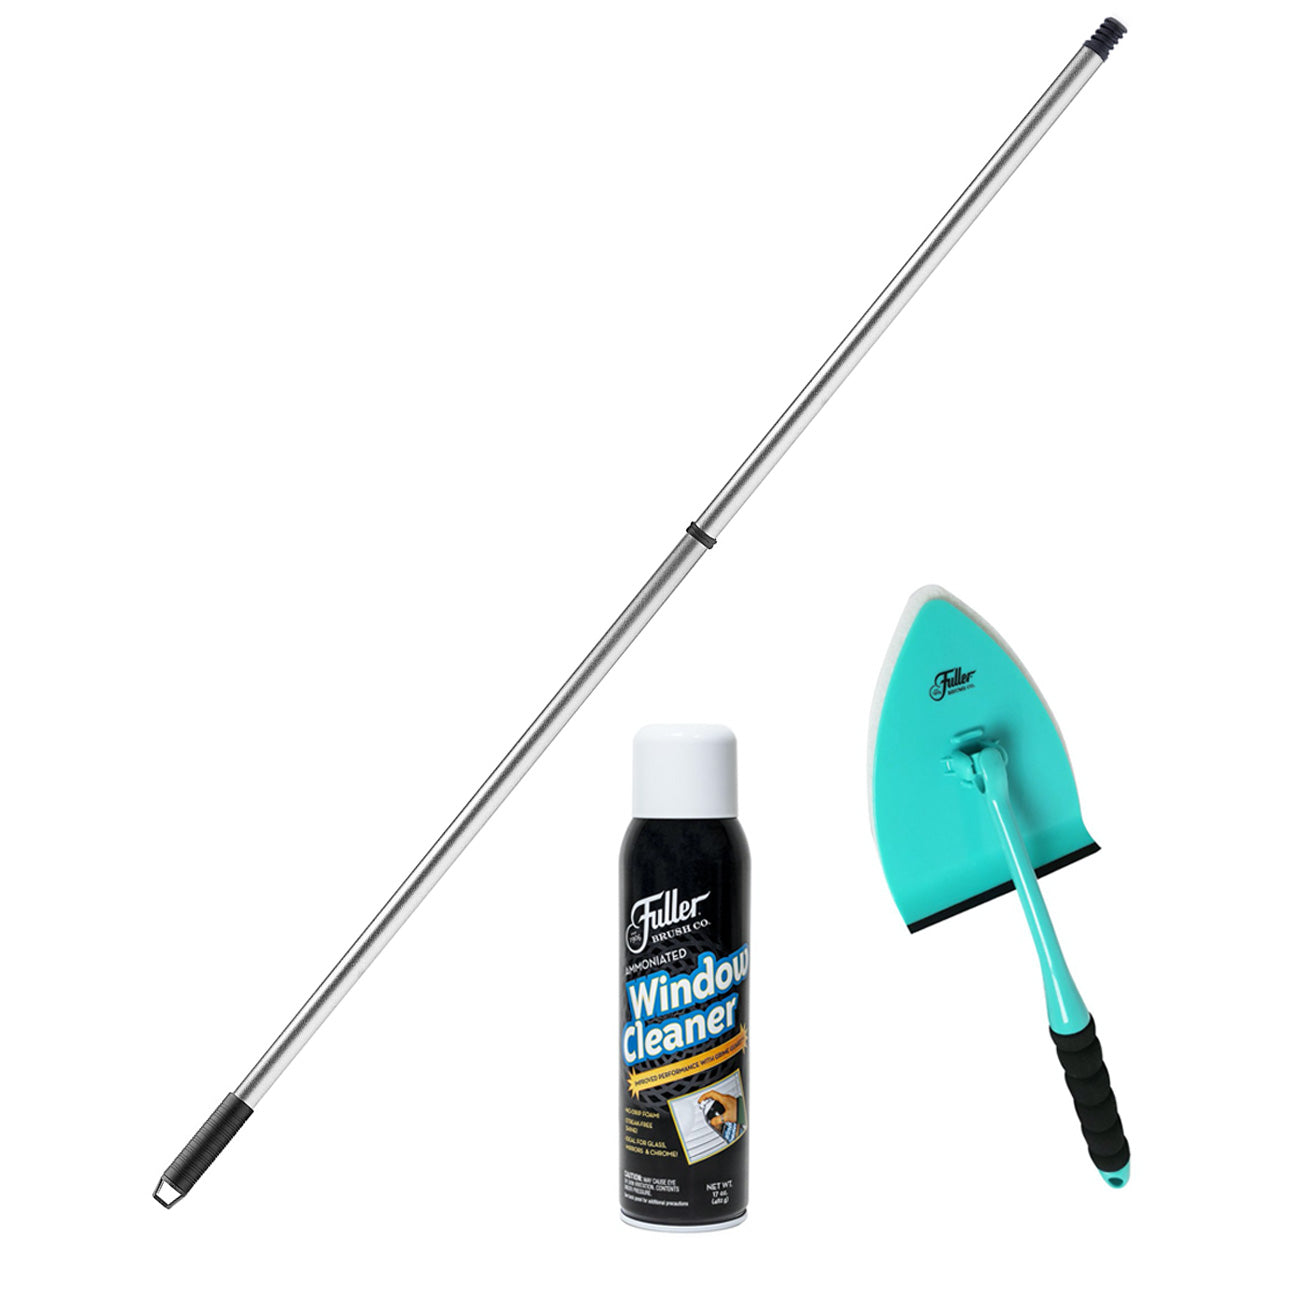 Ammoniated Window Cleaner with Big E-Z Scrubber and Adjustable Handle